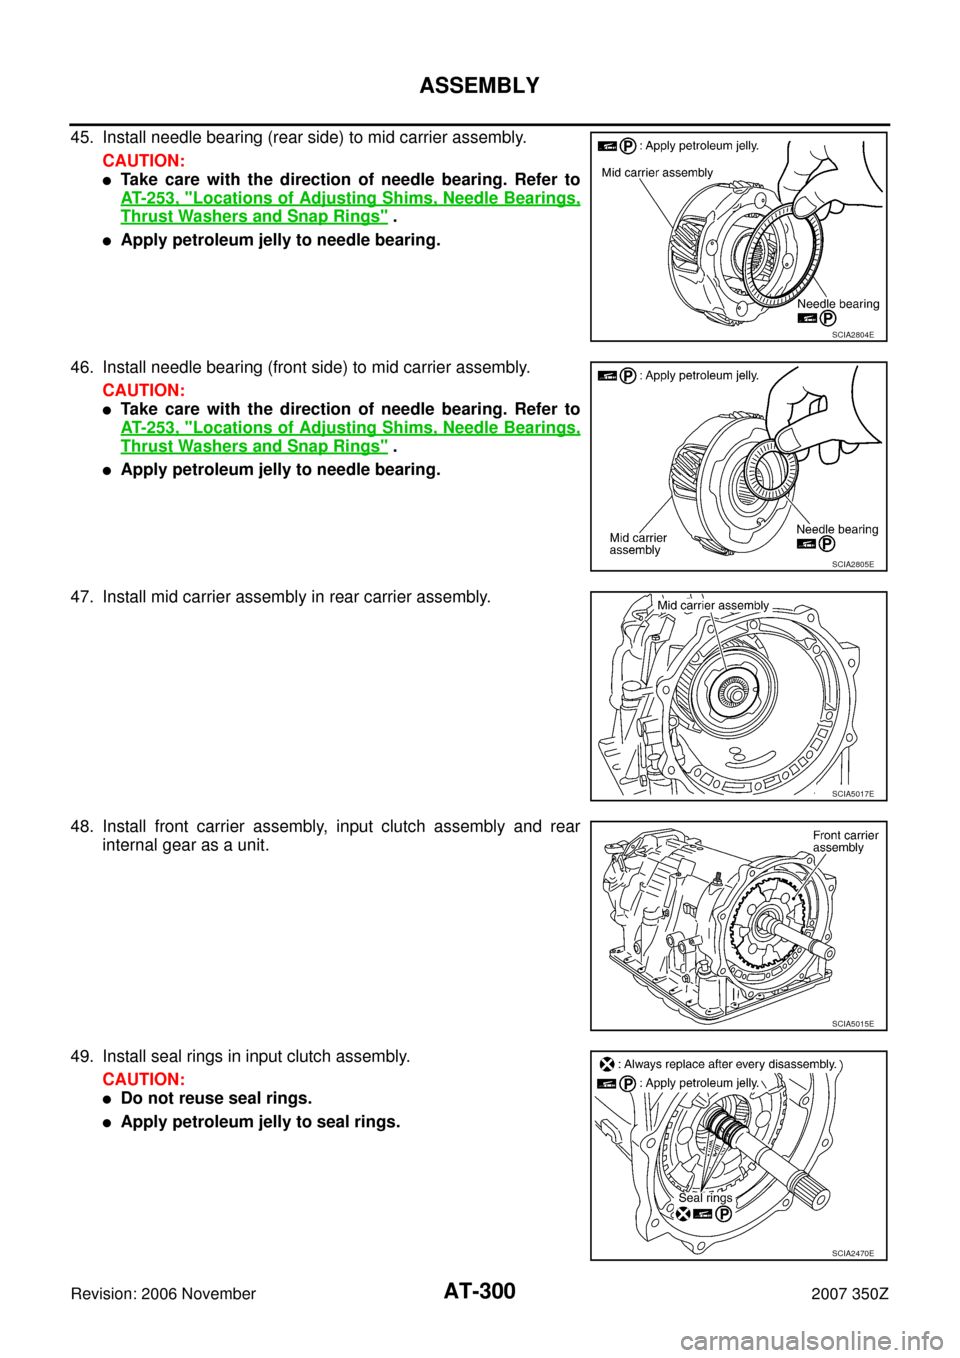 NISSAN 350Z 2007 Z33 Automatic Transmission Workshop Manual AT-300
ASSEMBLY
Revision: 2006 November2007 350Z
45. Install needle bearing (rear side) to mid carrier assembly.
CAUTION:
Take care with the direction of needle bearing. Refer to
AT- 2 5 3 ,  "
Locat